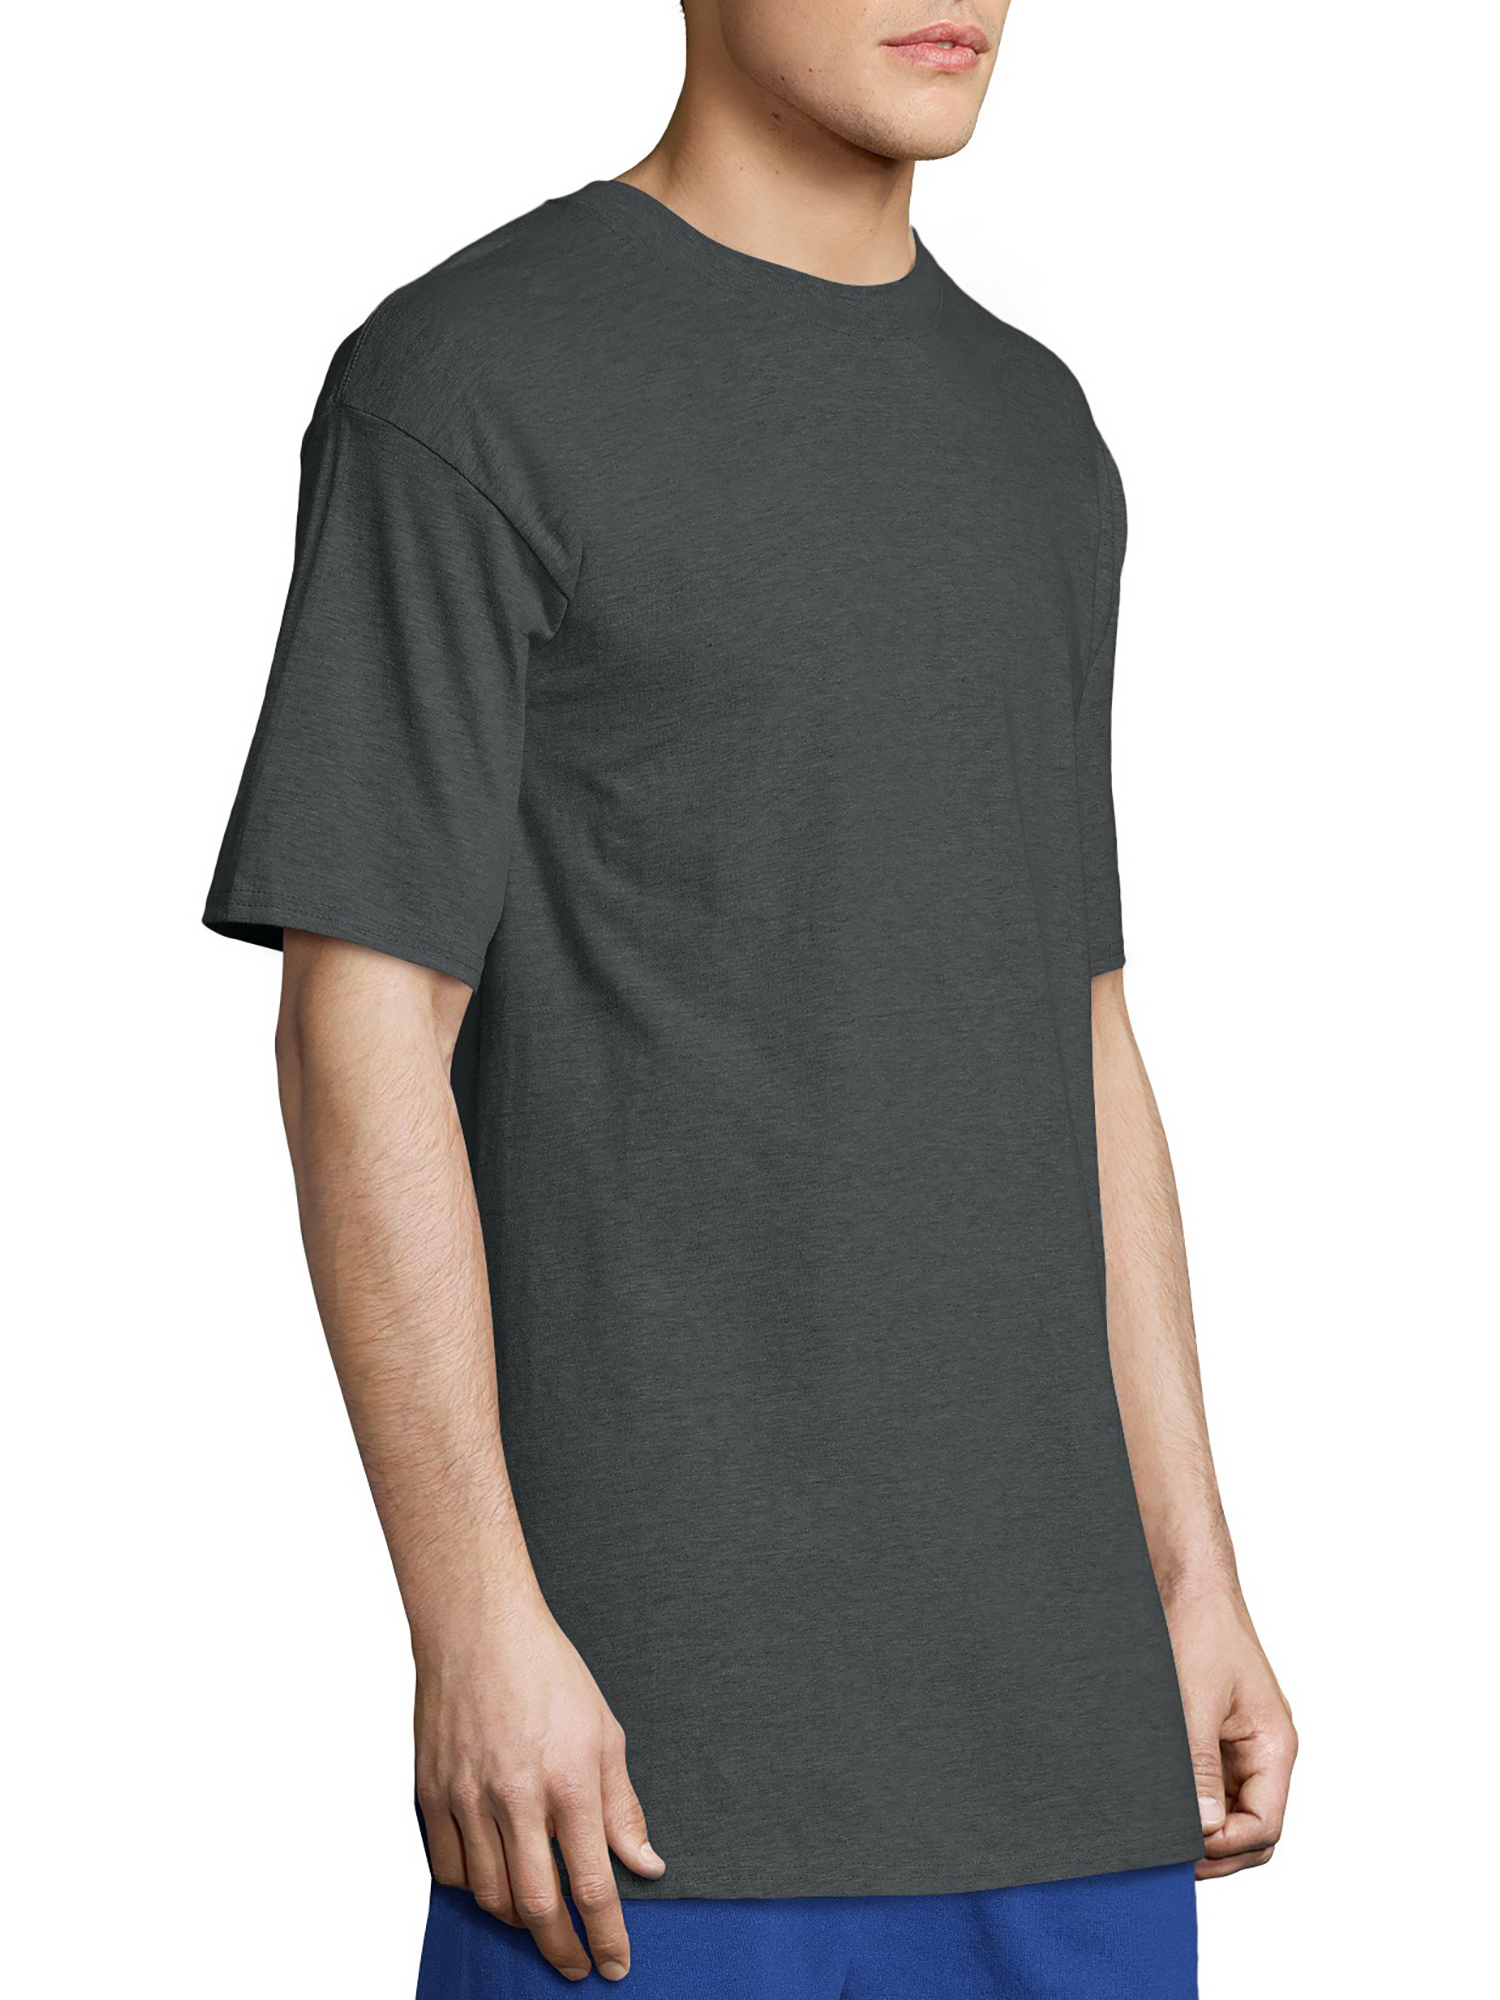 Hanes Big Men's Beefy Heavyweight Short Sleeve T-shirt - Tall Sizes, Up To Size 4XT - image 5 of 7